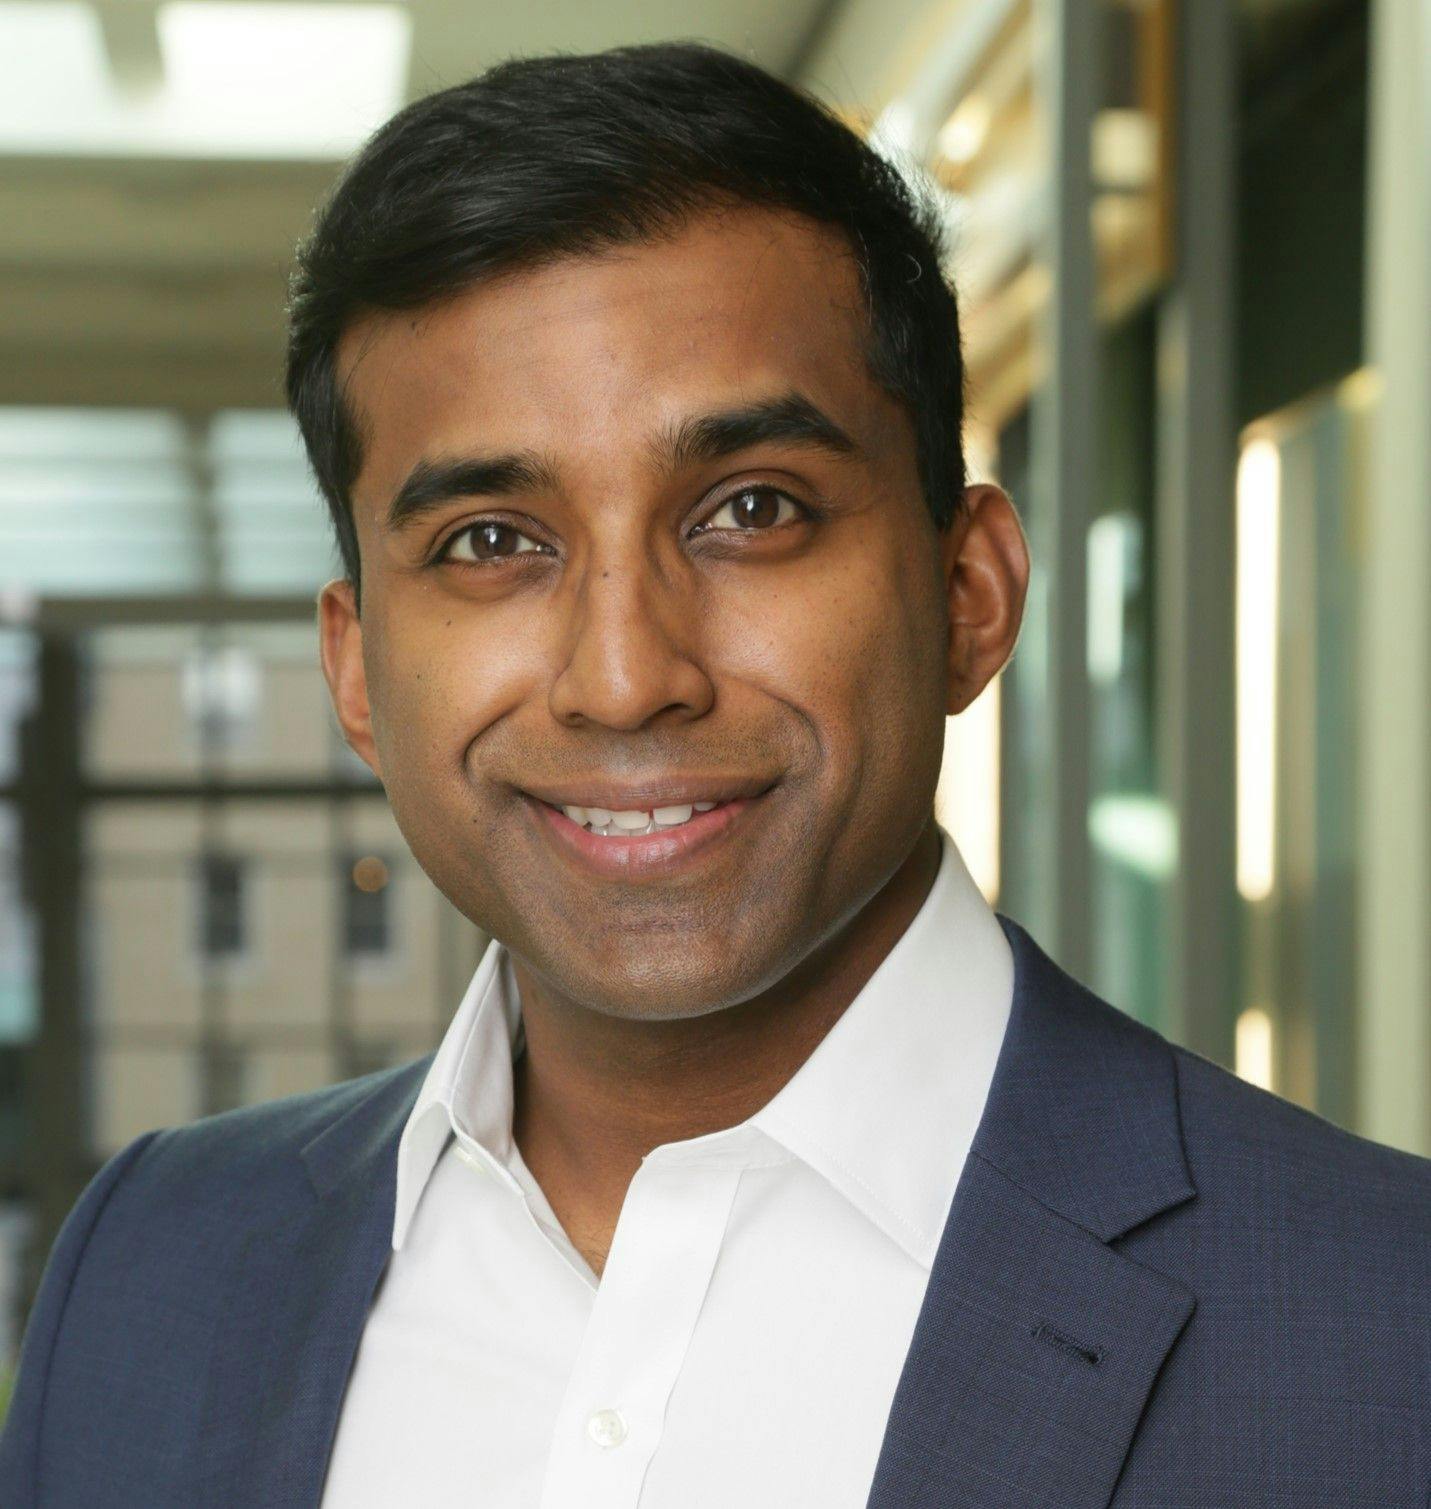 Muthiah Vaduganathan, MD, MPH | Credit: Brigham and Women's Hospital